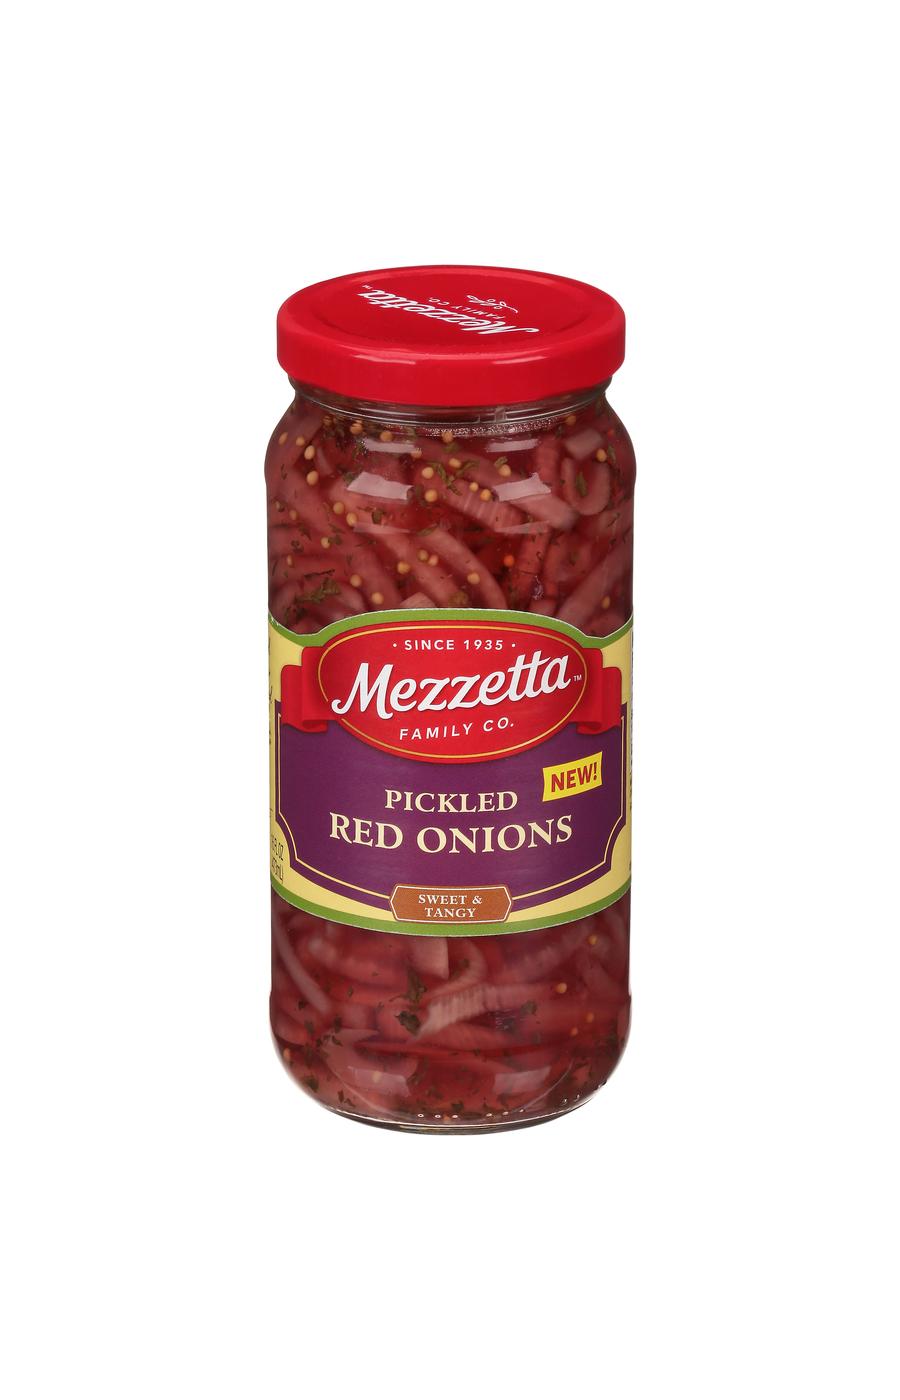 Mezzetta Pickled Red Onions; image 1 of 3